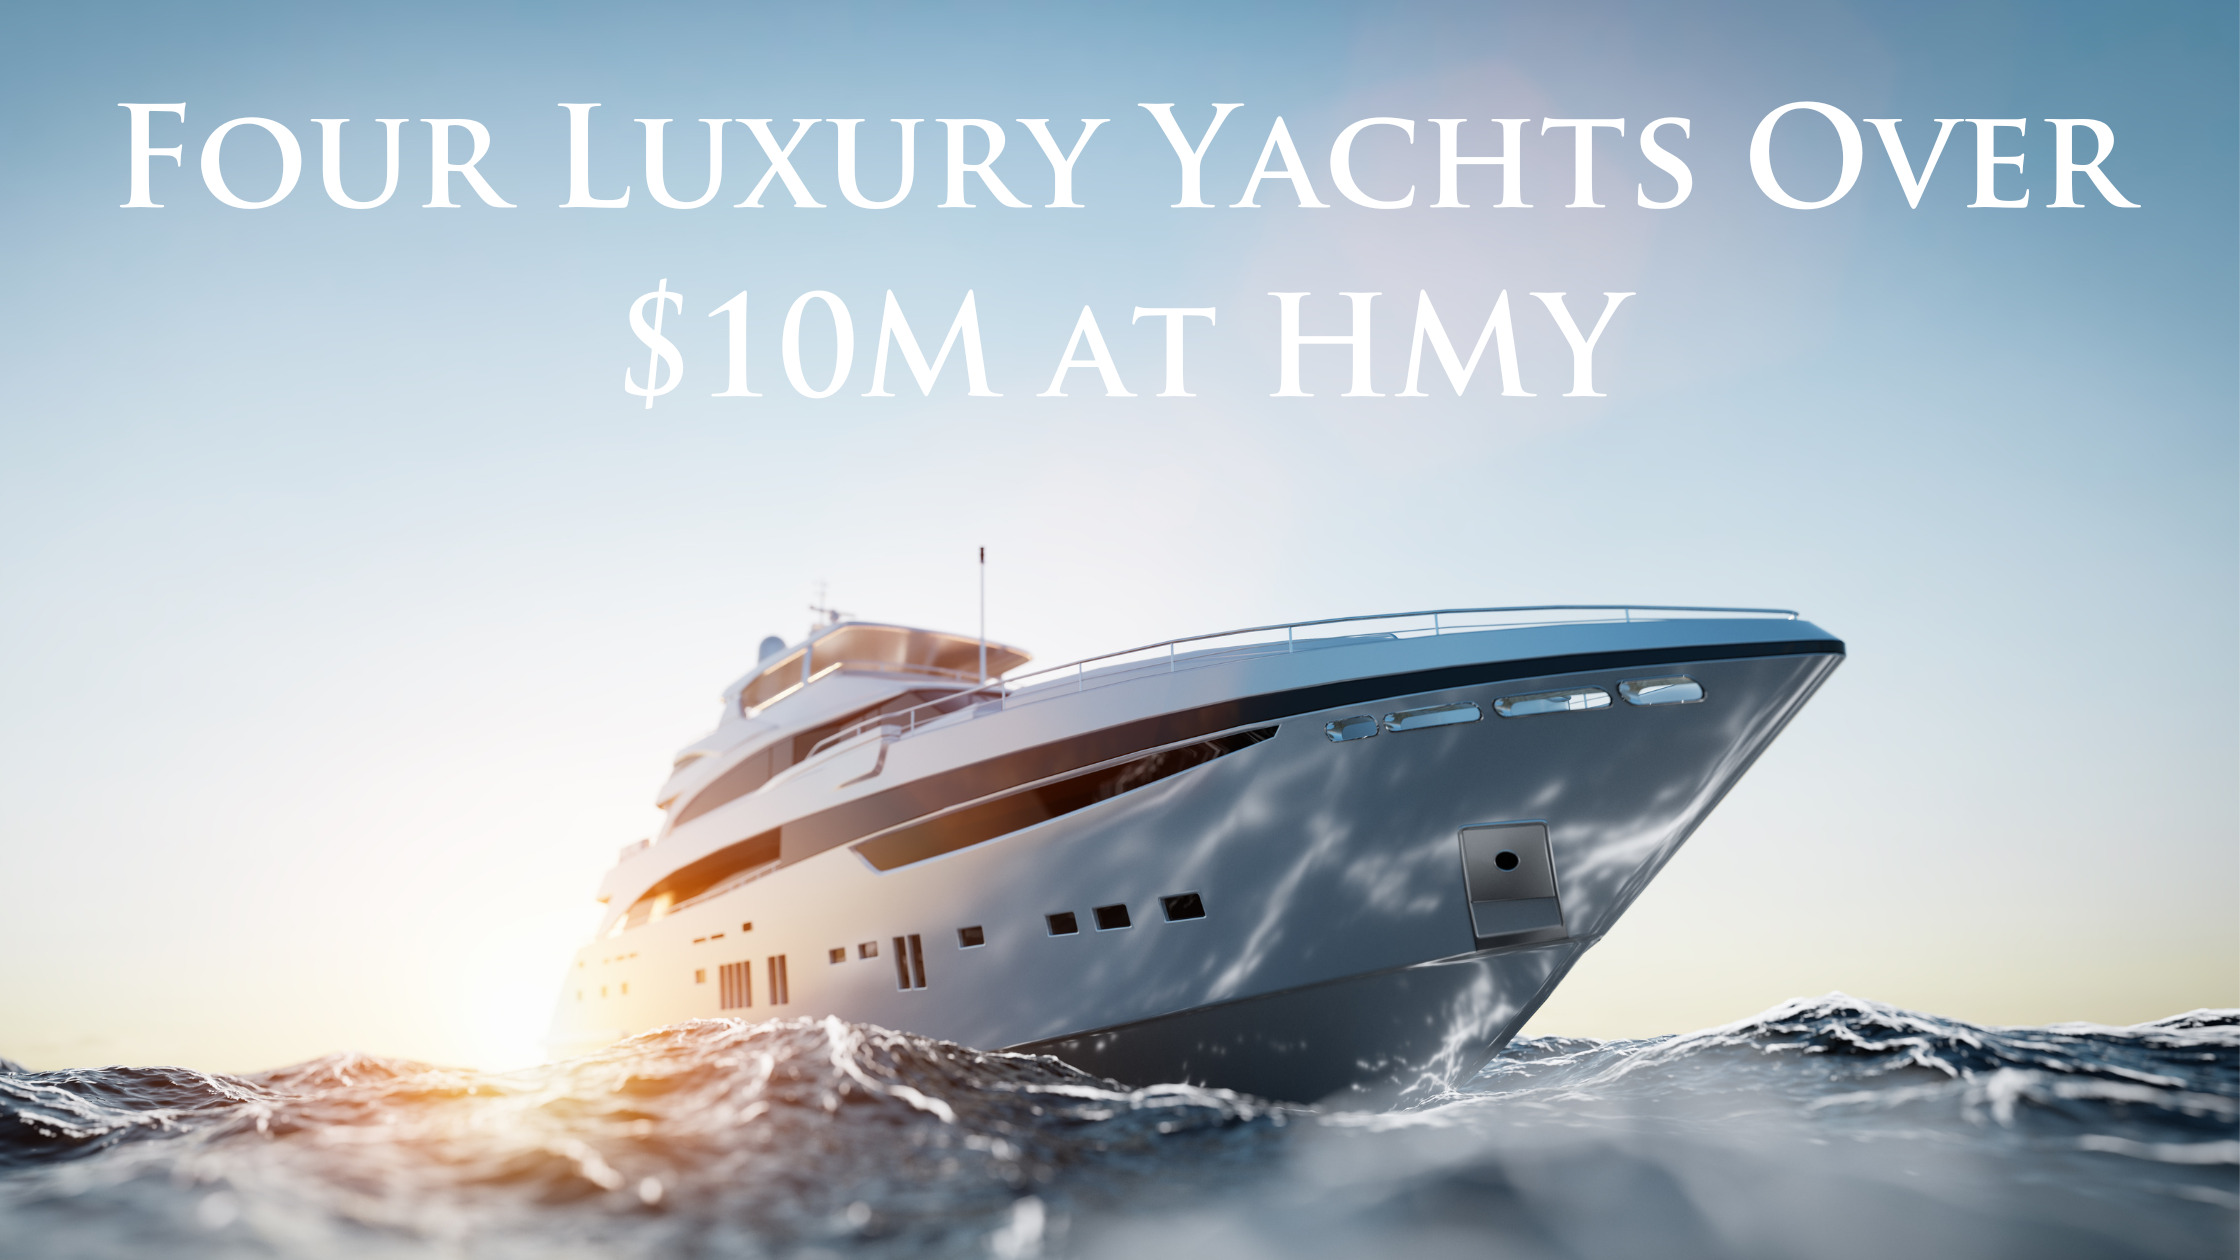 Four $10M+ Luxury Yachts for Sale at HMY